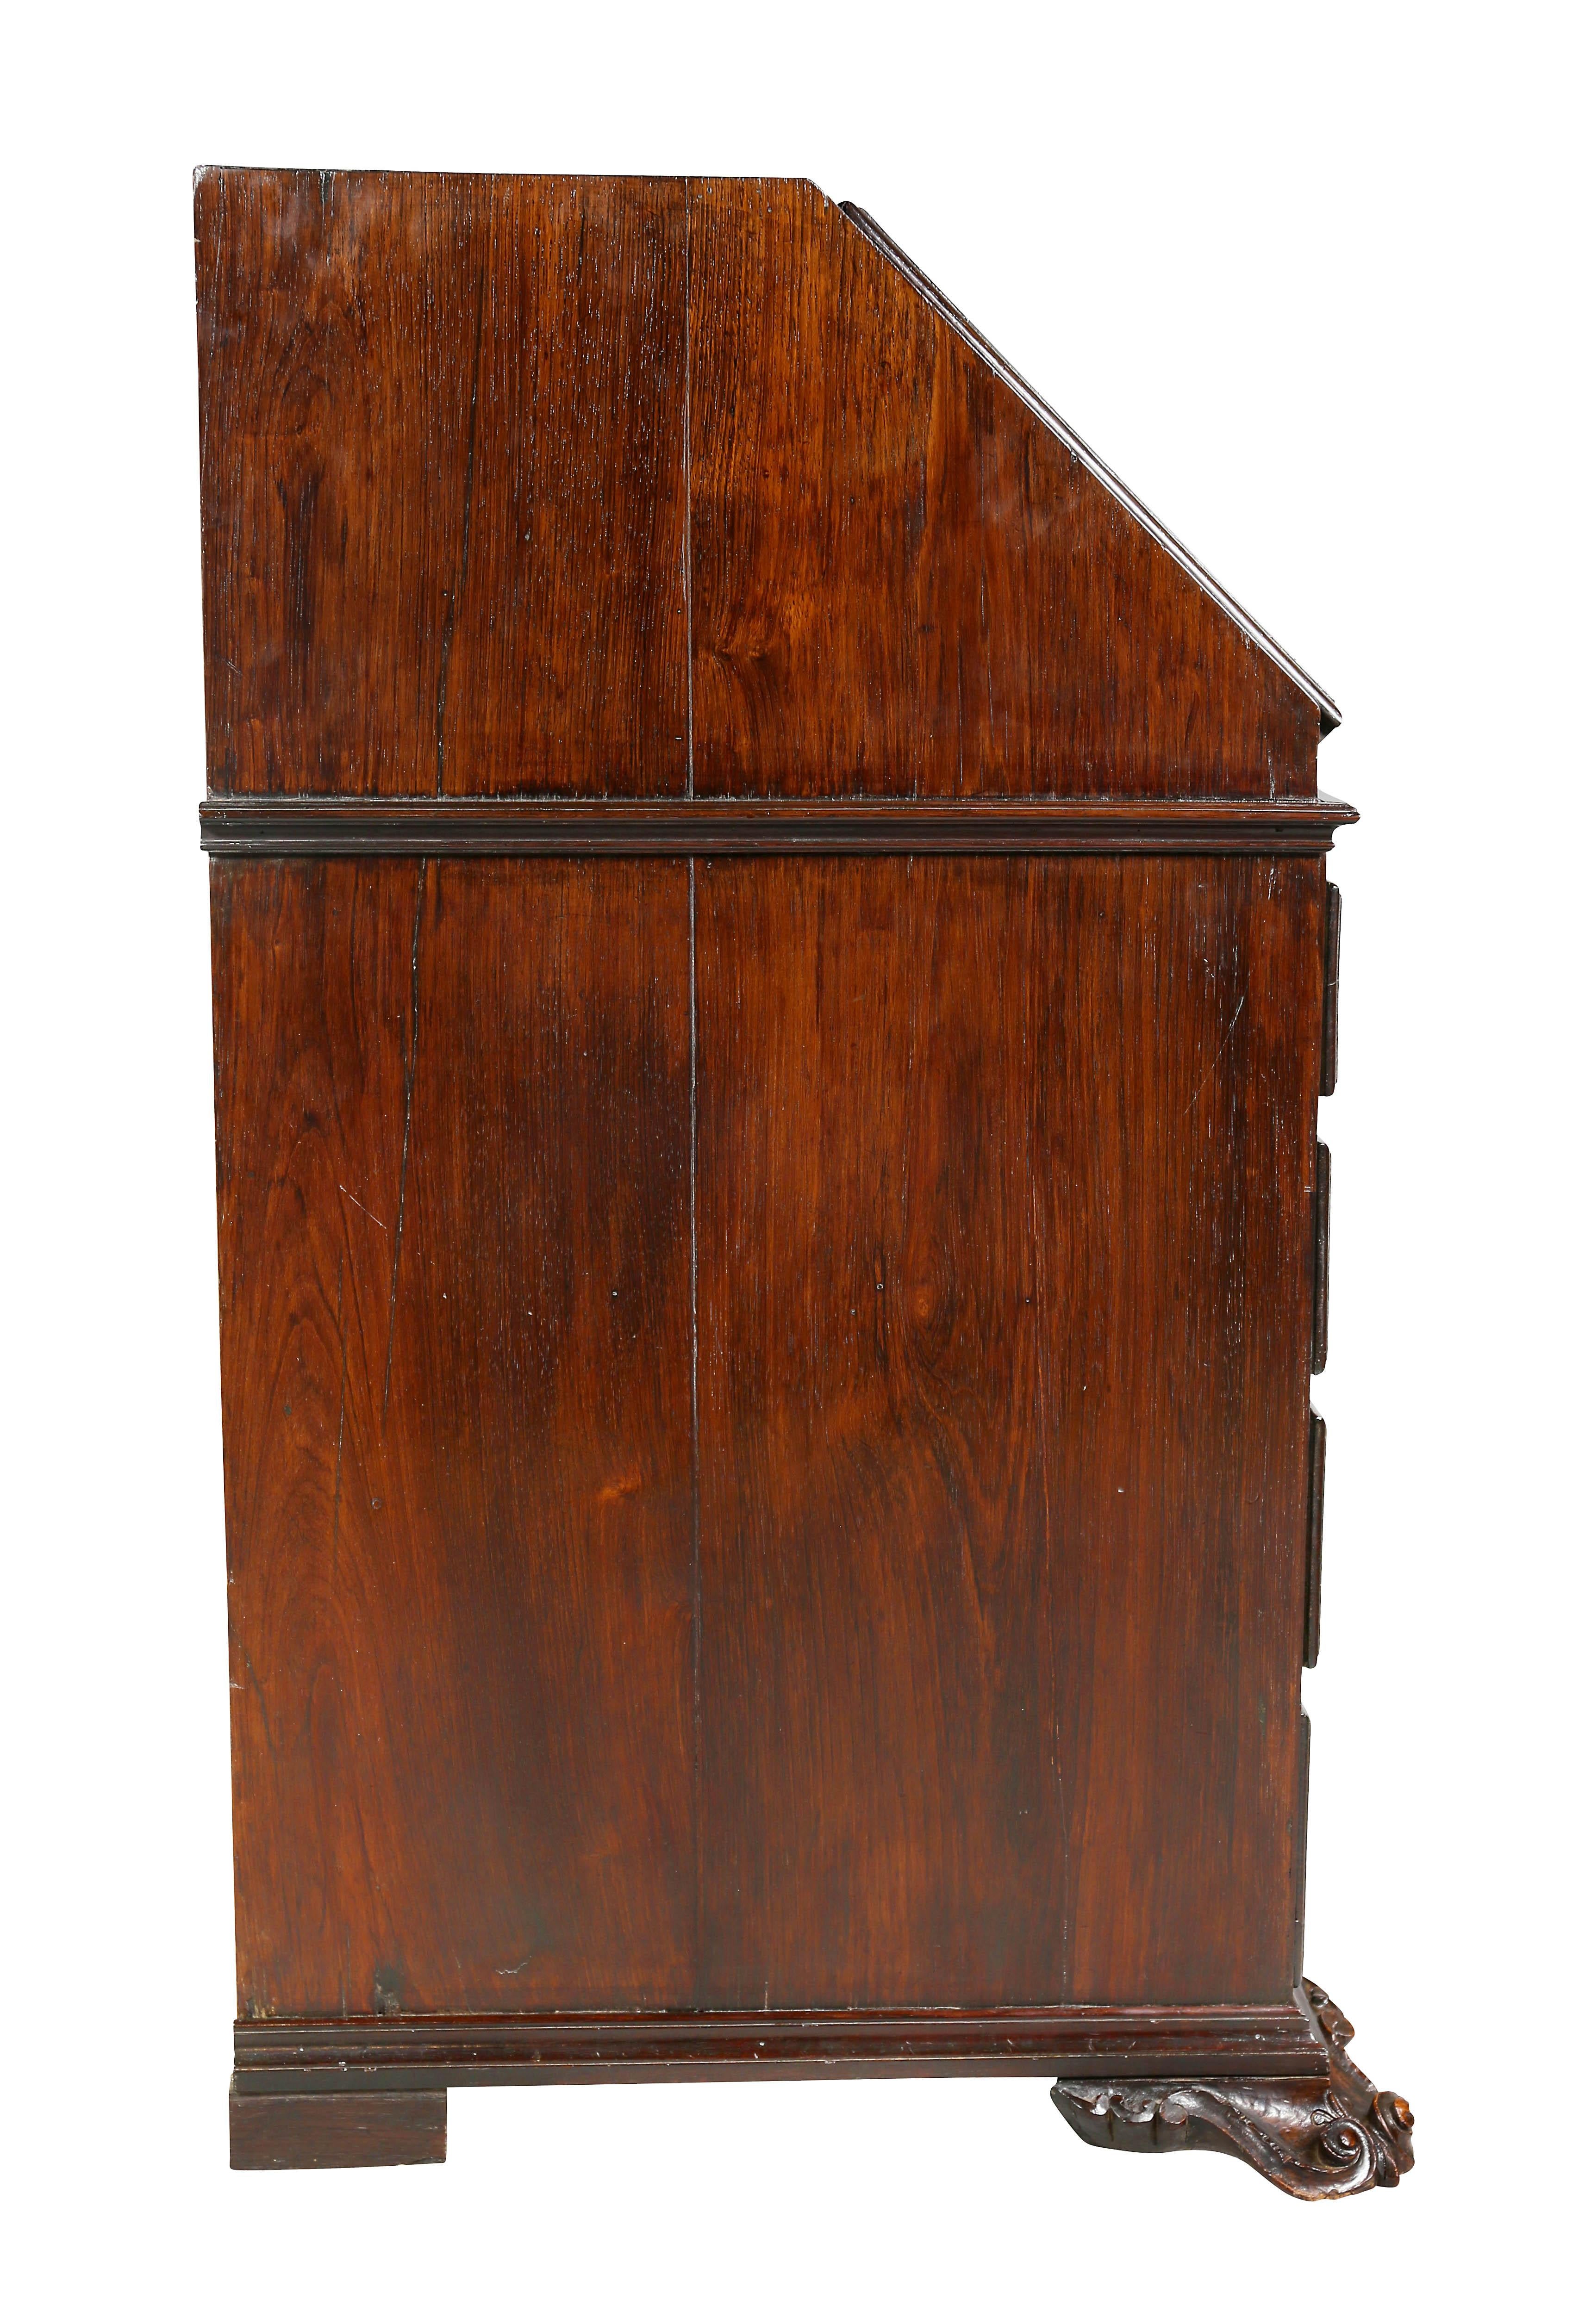 Portuguese Colonial Brazilian Solid Rosewood Slant Lid Writing Desk For Sale 6